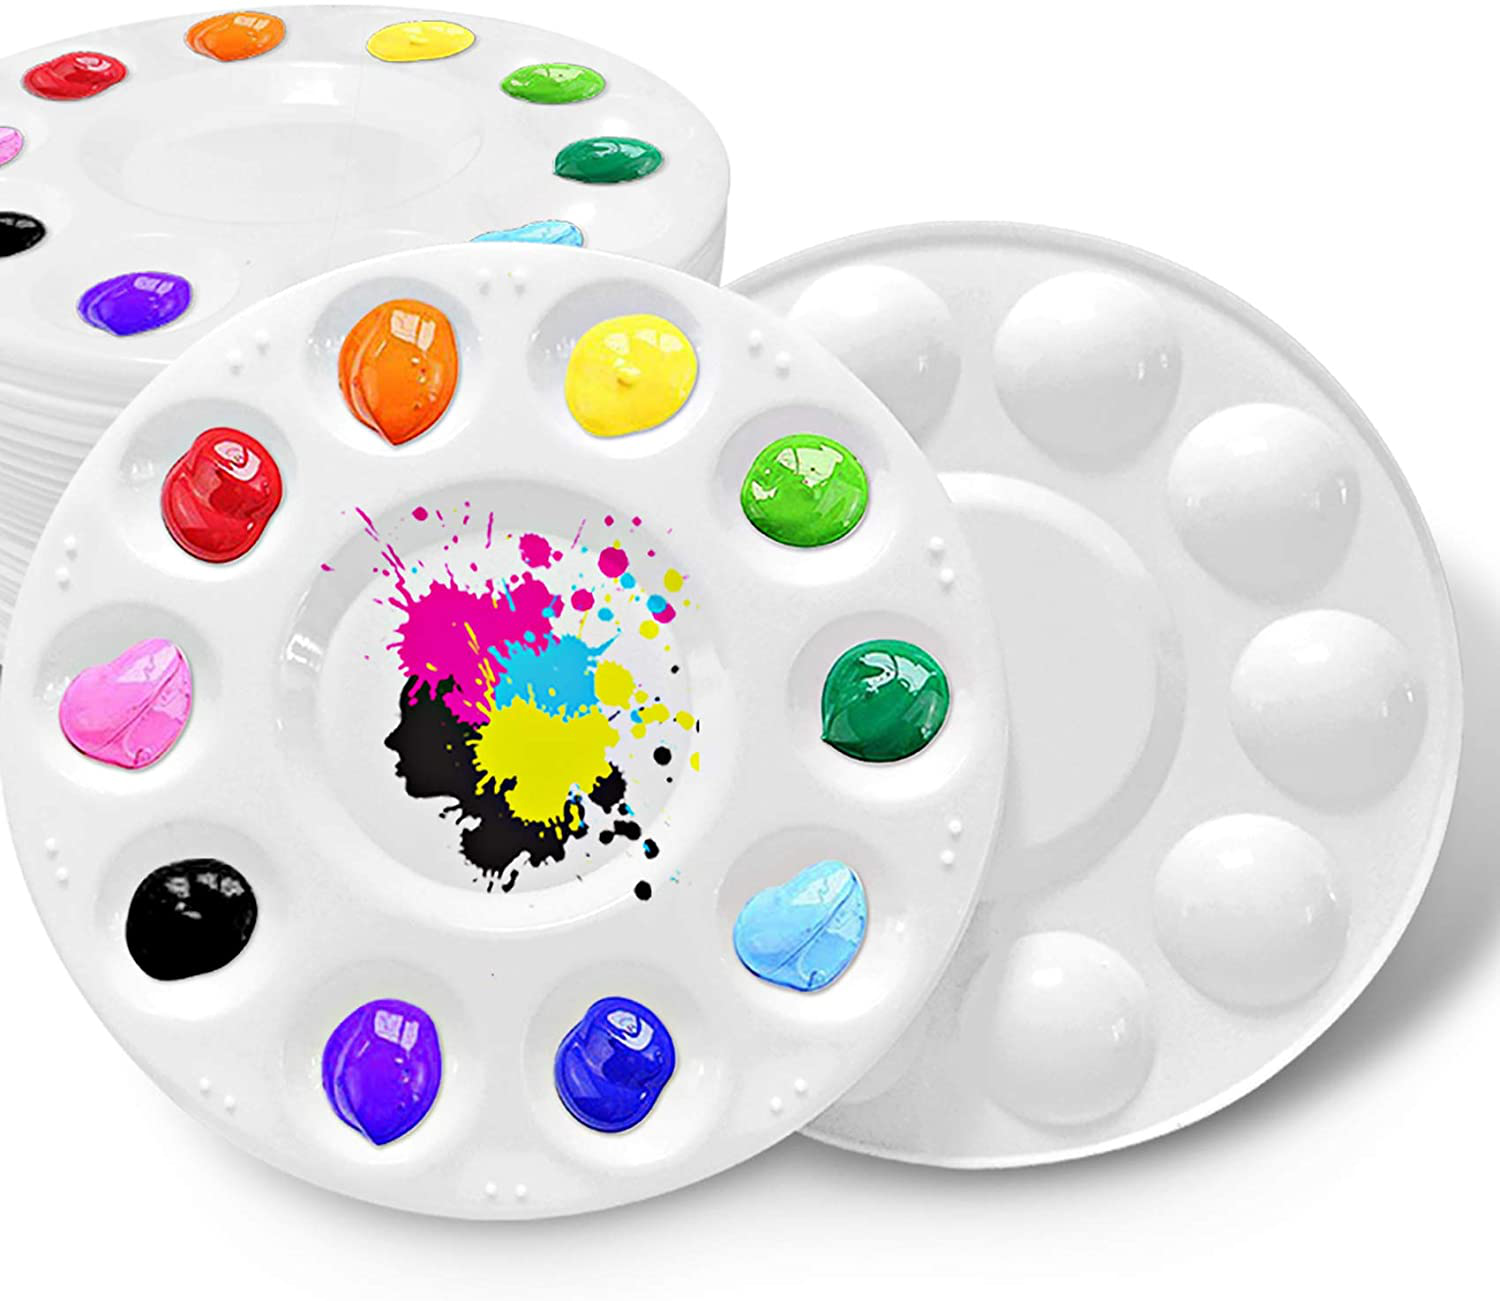 Hulameda Paint Tray Palettes, Plastic Paint Pallets for Kids or Students to Paints on School Project or Art Class